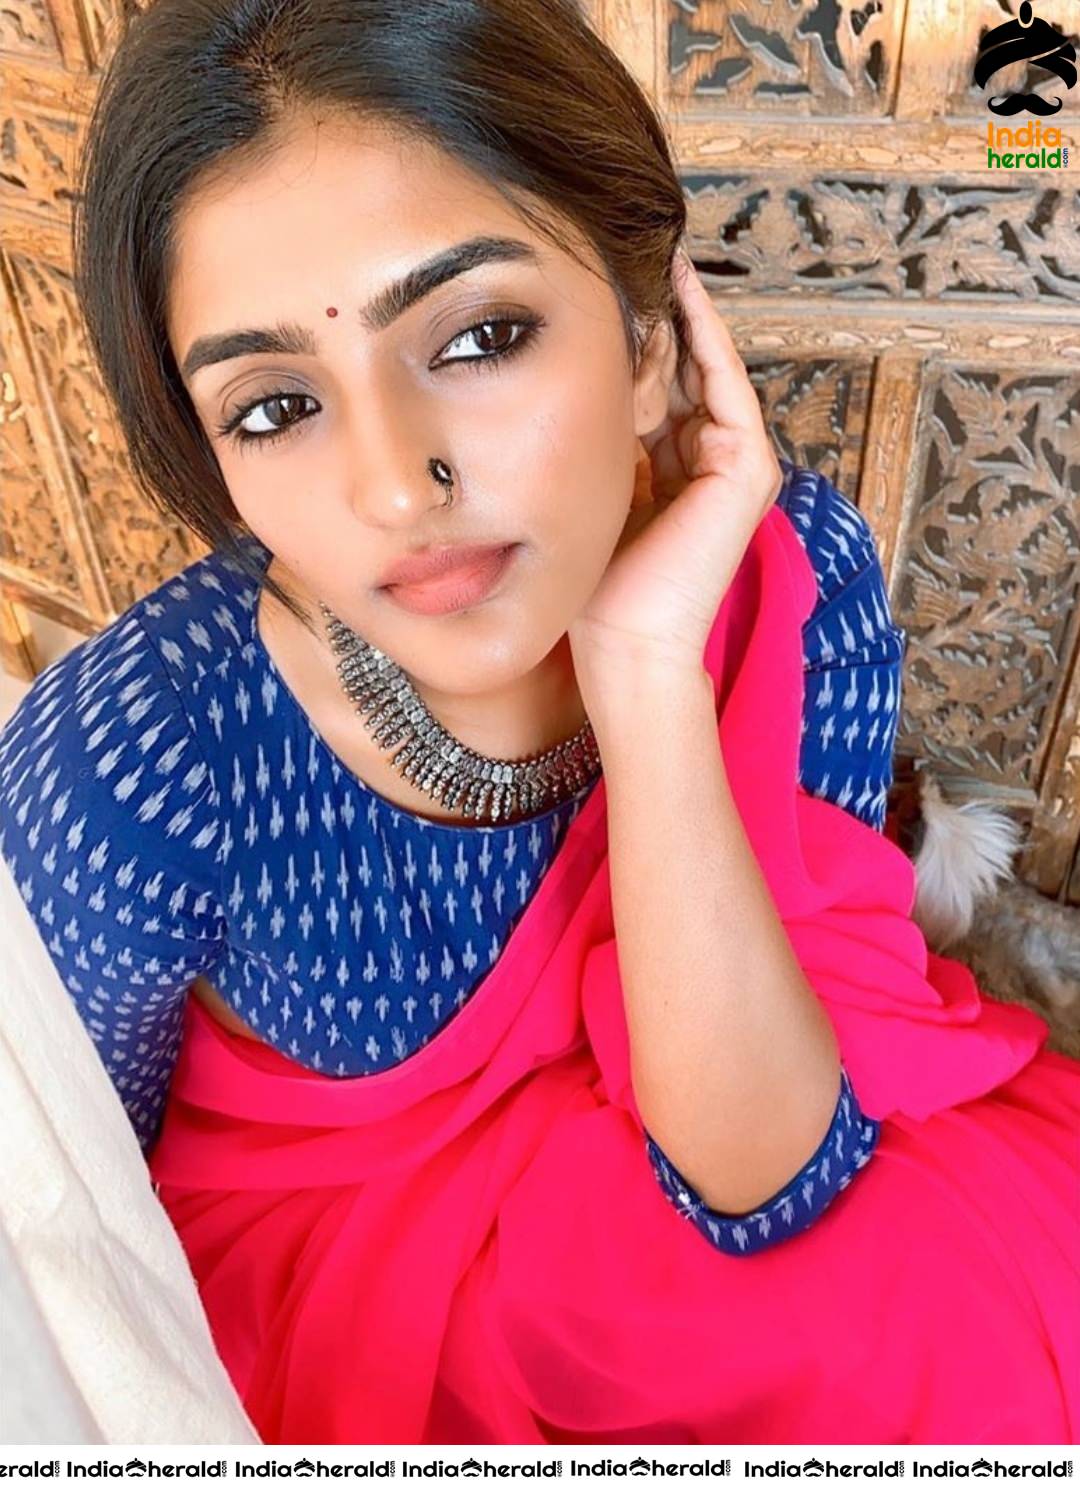 Latest Cute Stills of Eesha Rebba with Nose Ring